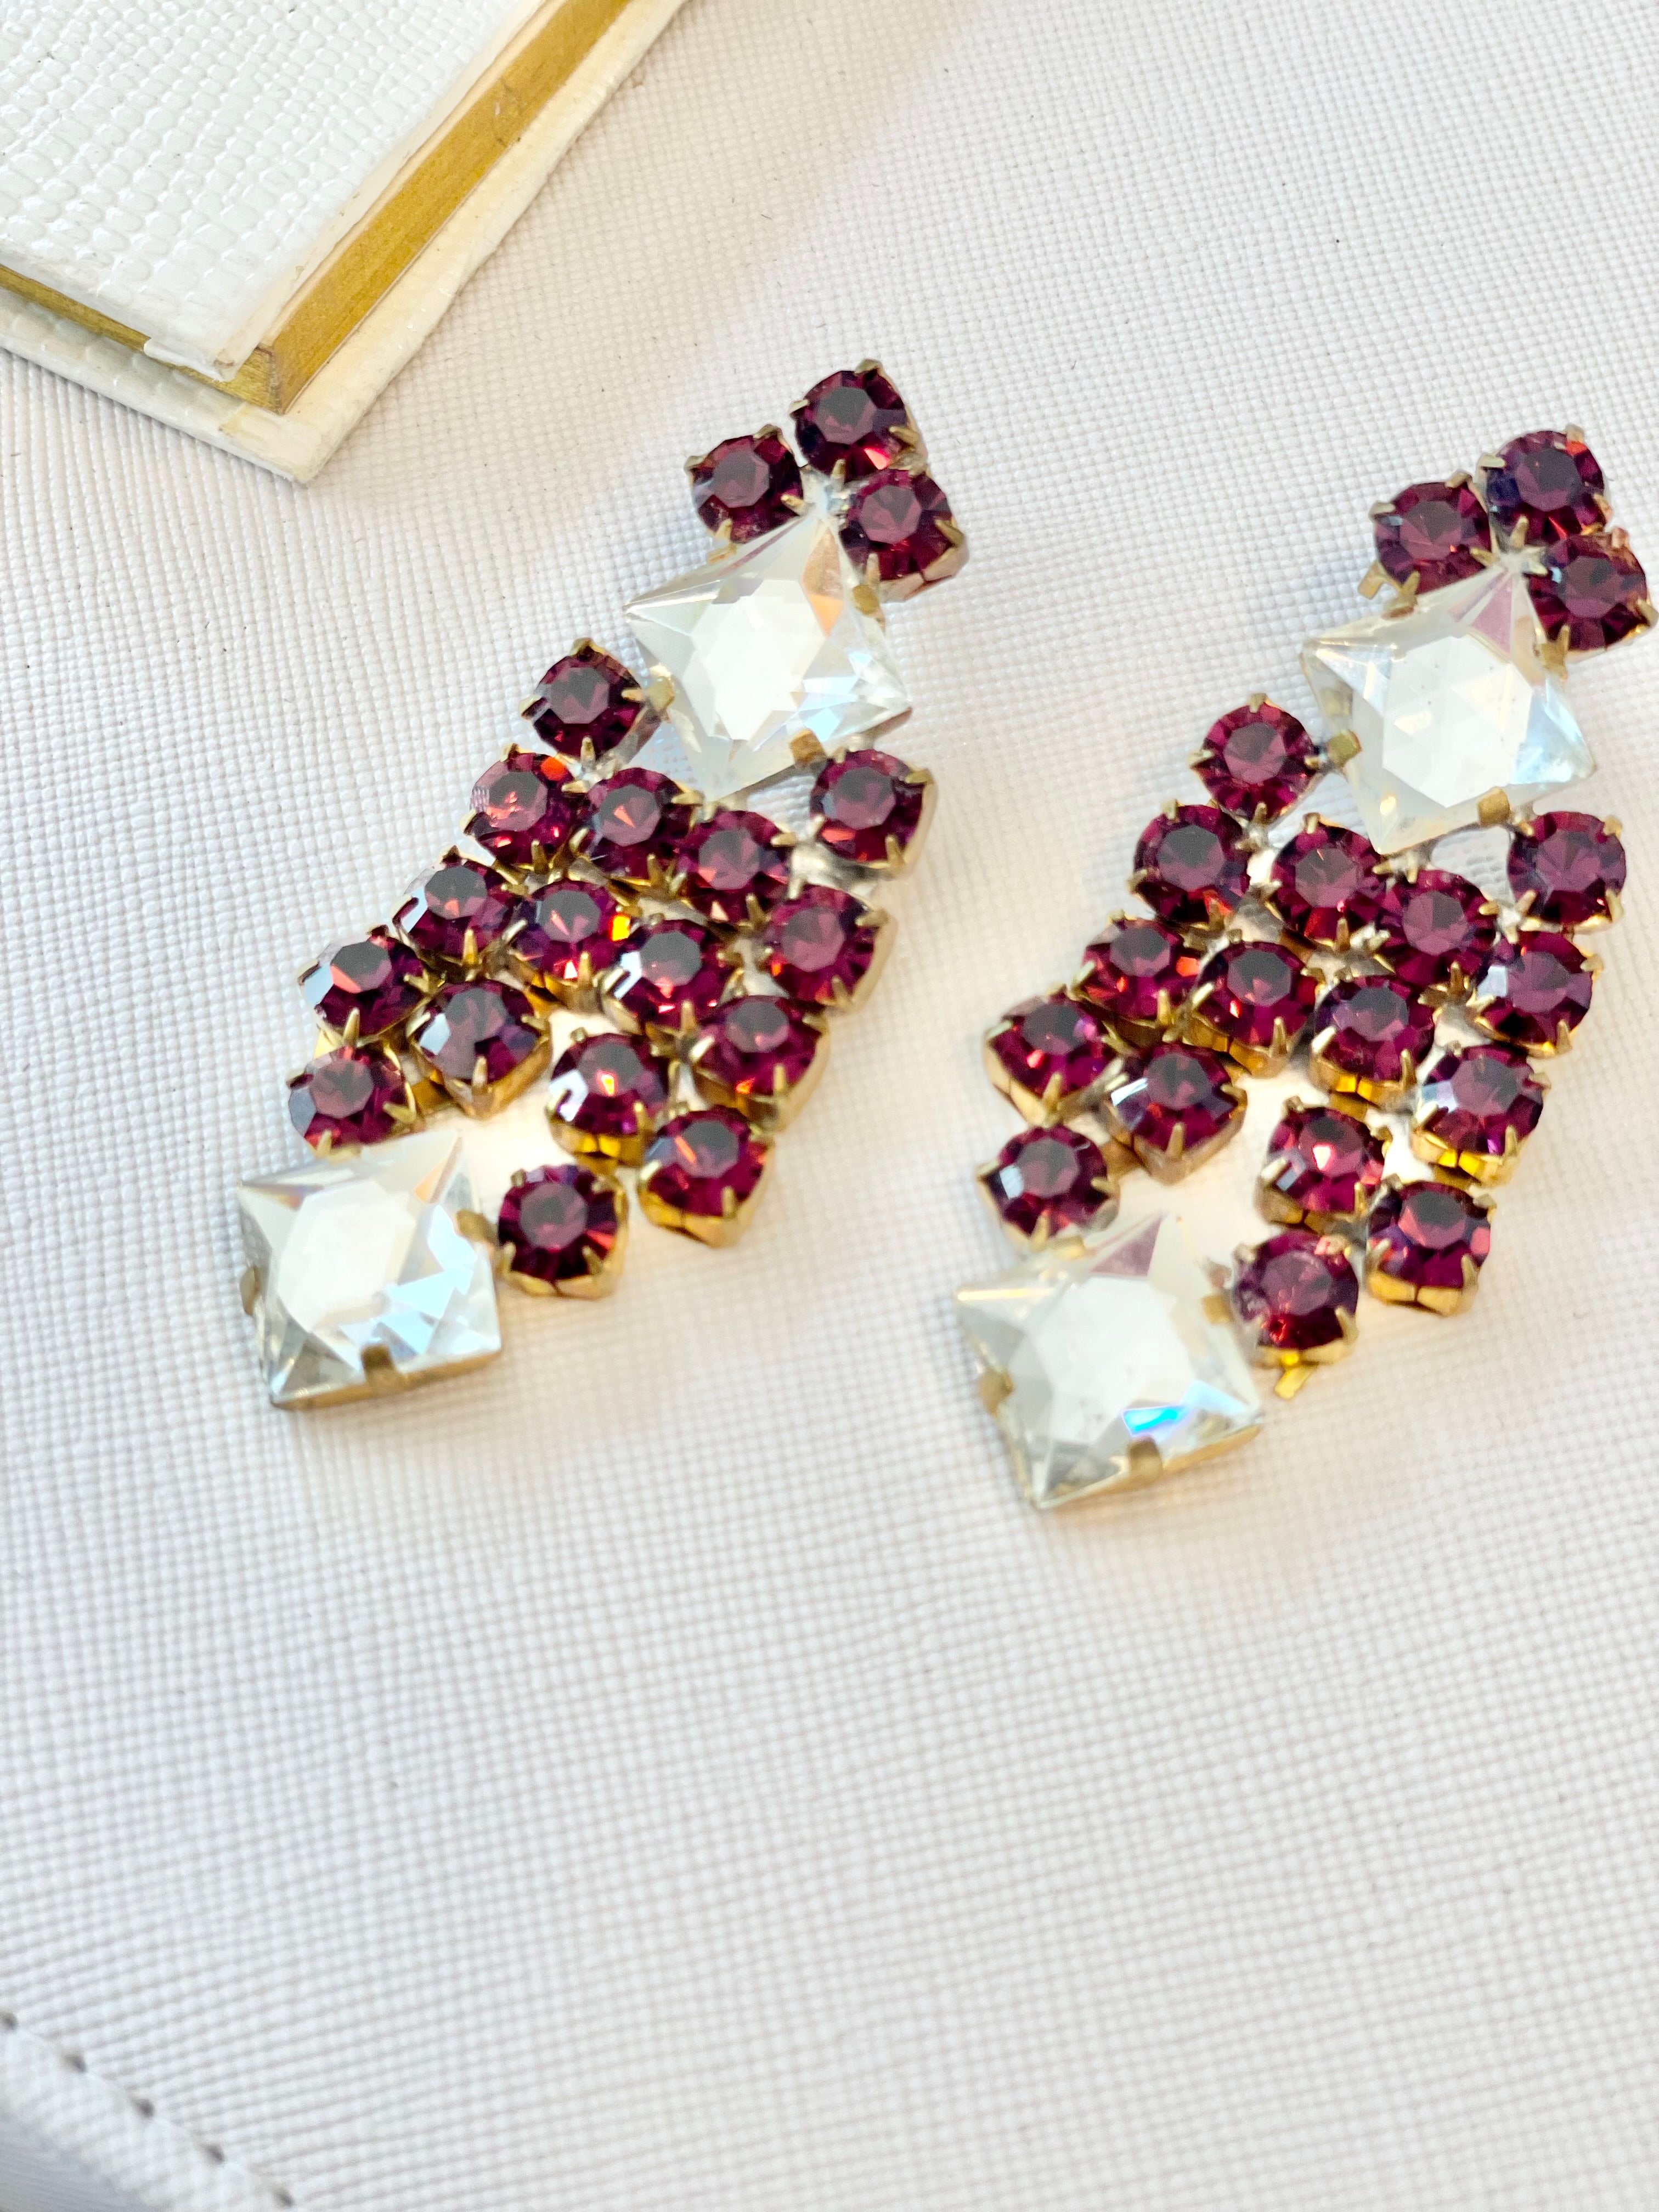 Stunning Czech glass drop earrings.... so divine, and the colors are so rich!